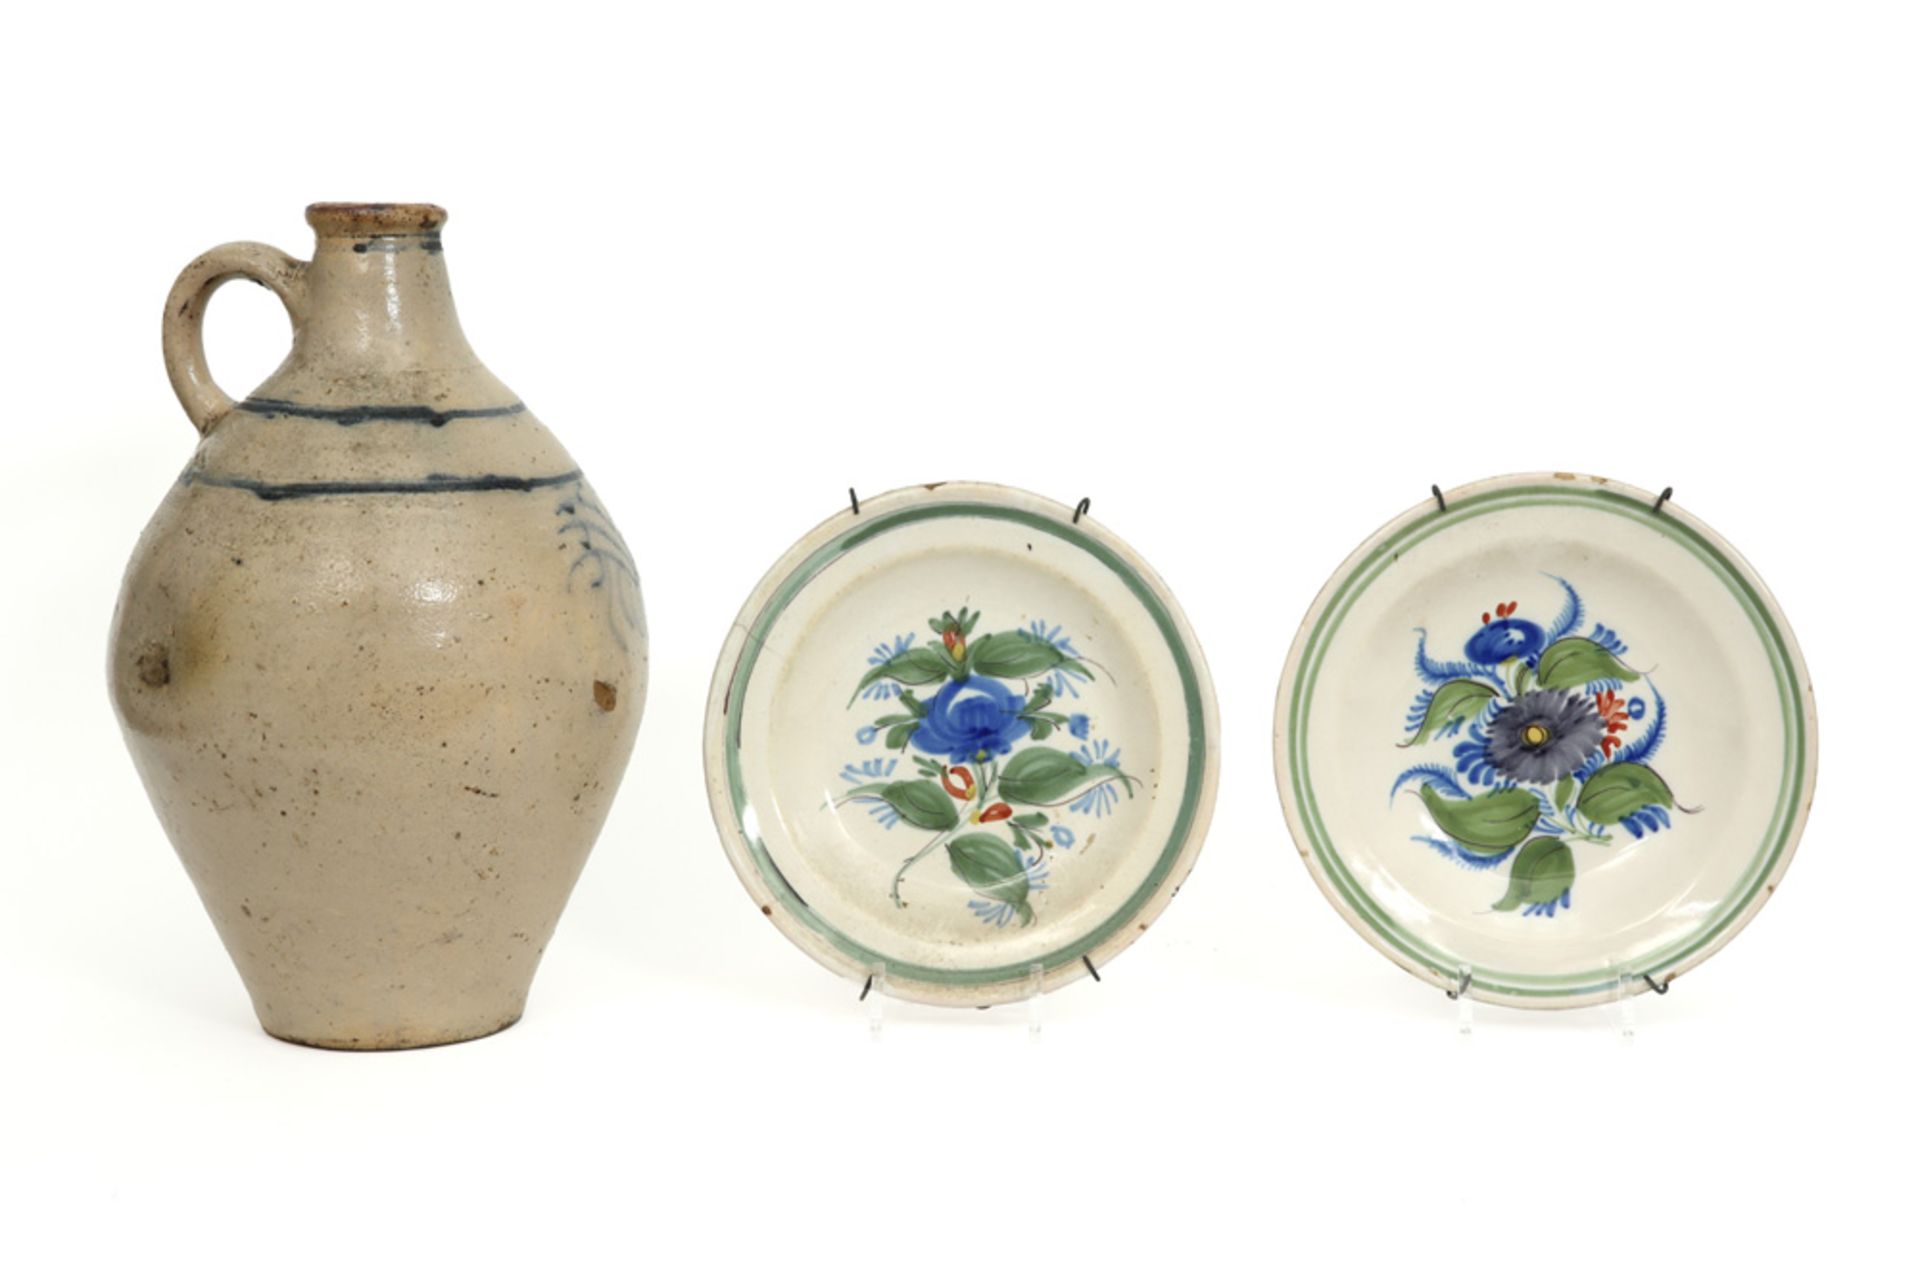 3 pieces of antique earthenware : two plates and a pitcher